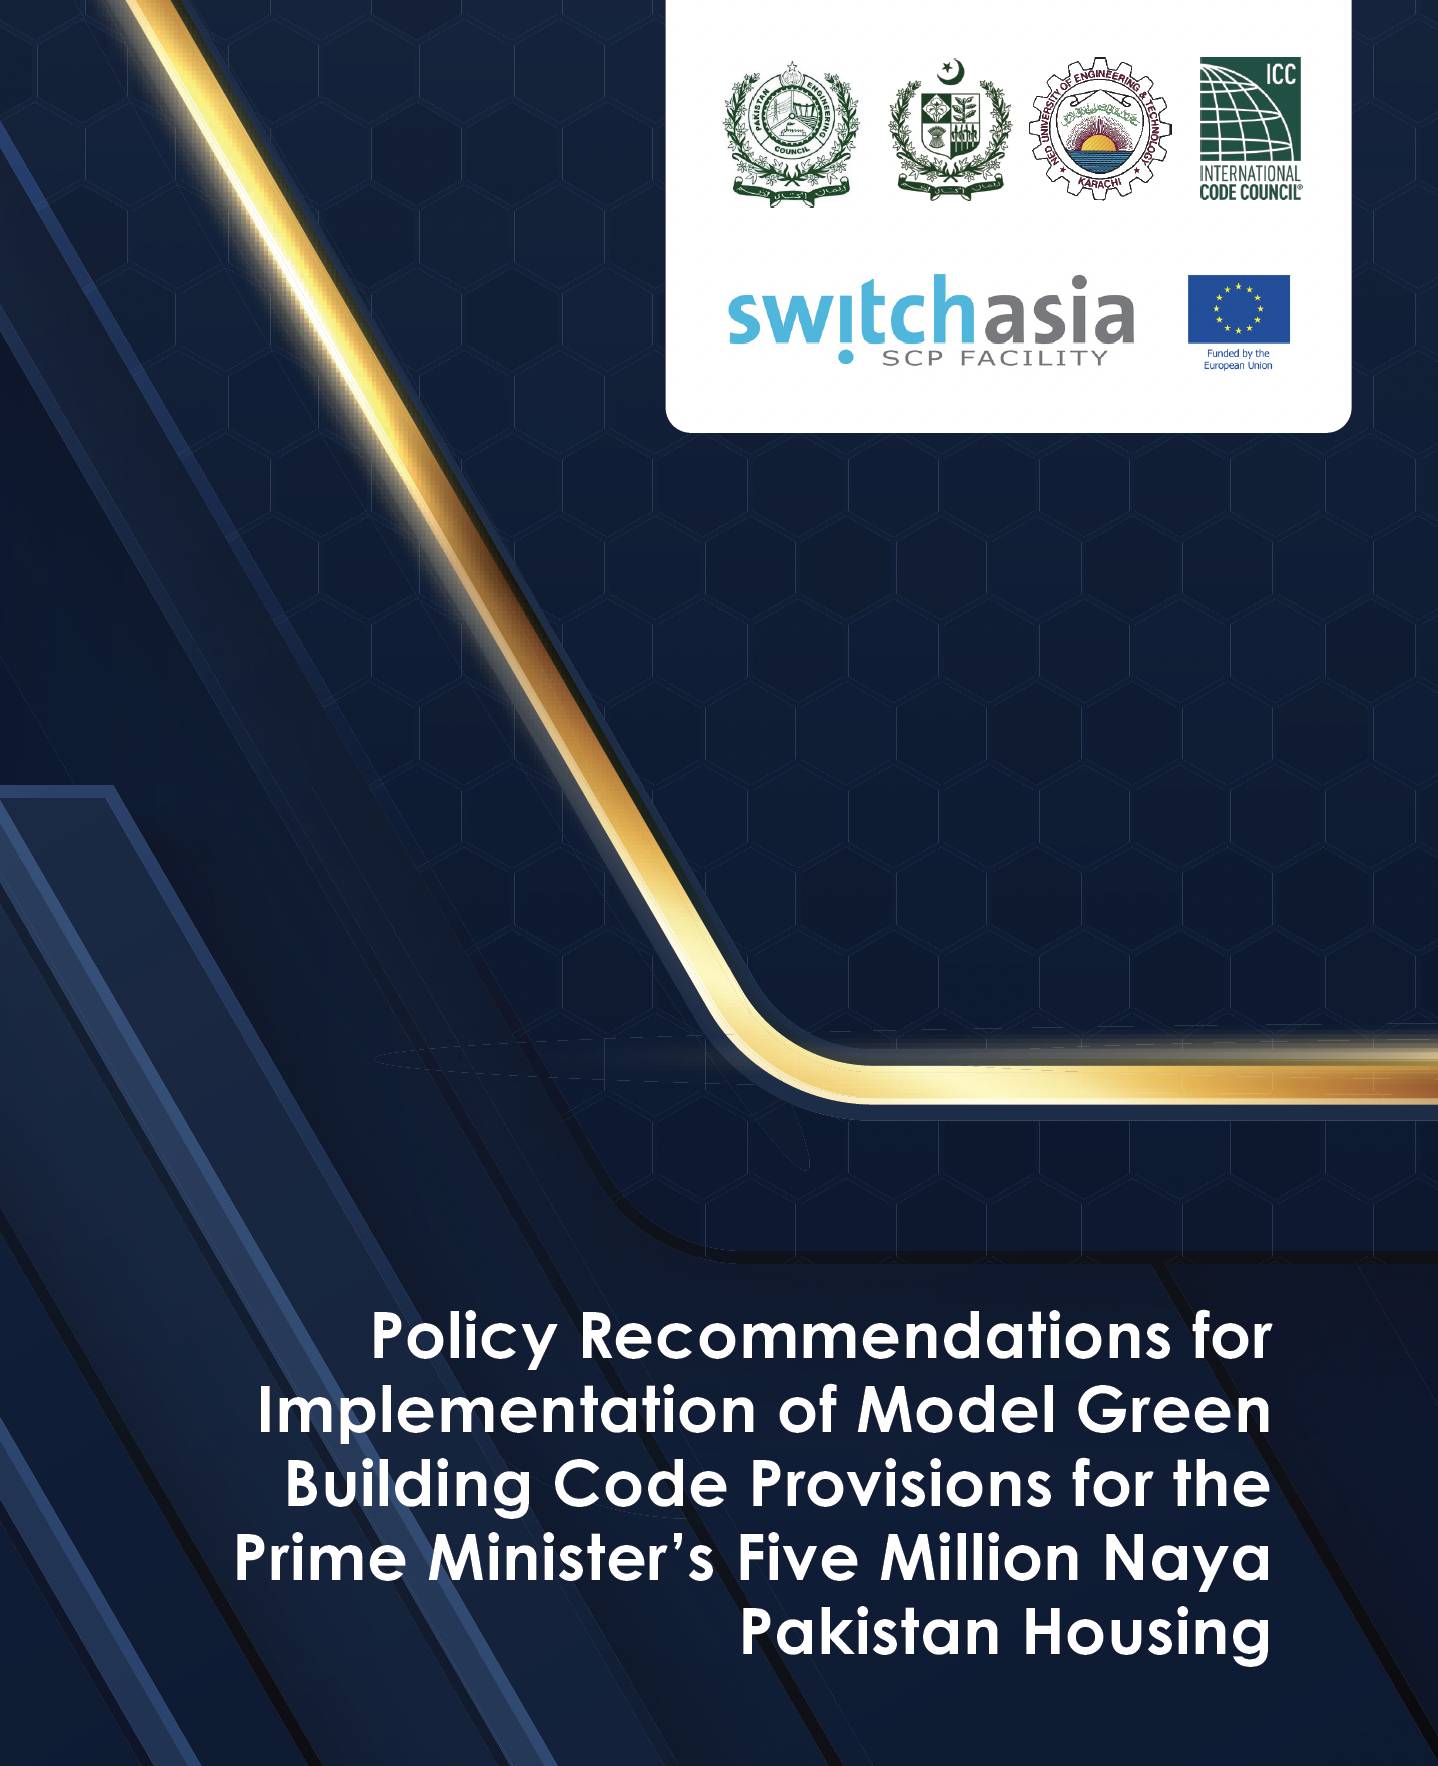 Policy Recommendations for Implementation of Model Green Building Code Provisions for the Prime Minister’s Five Million Naya Pakistan Housing